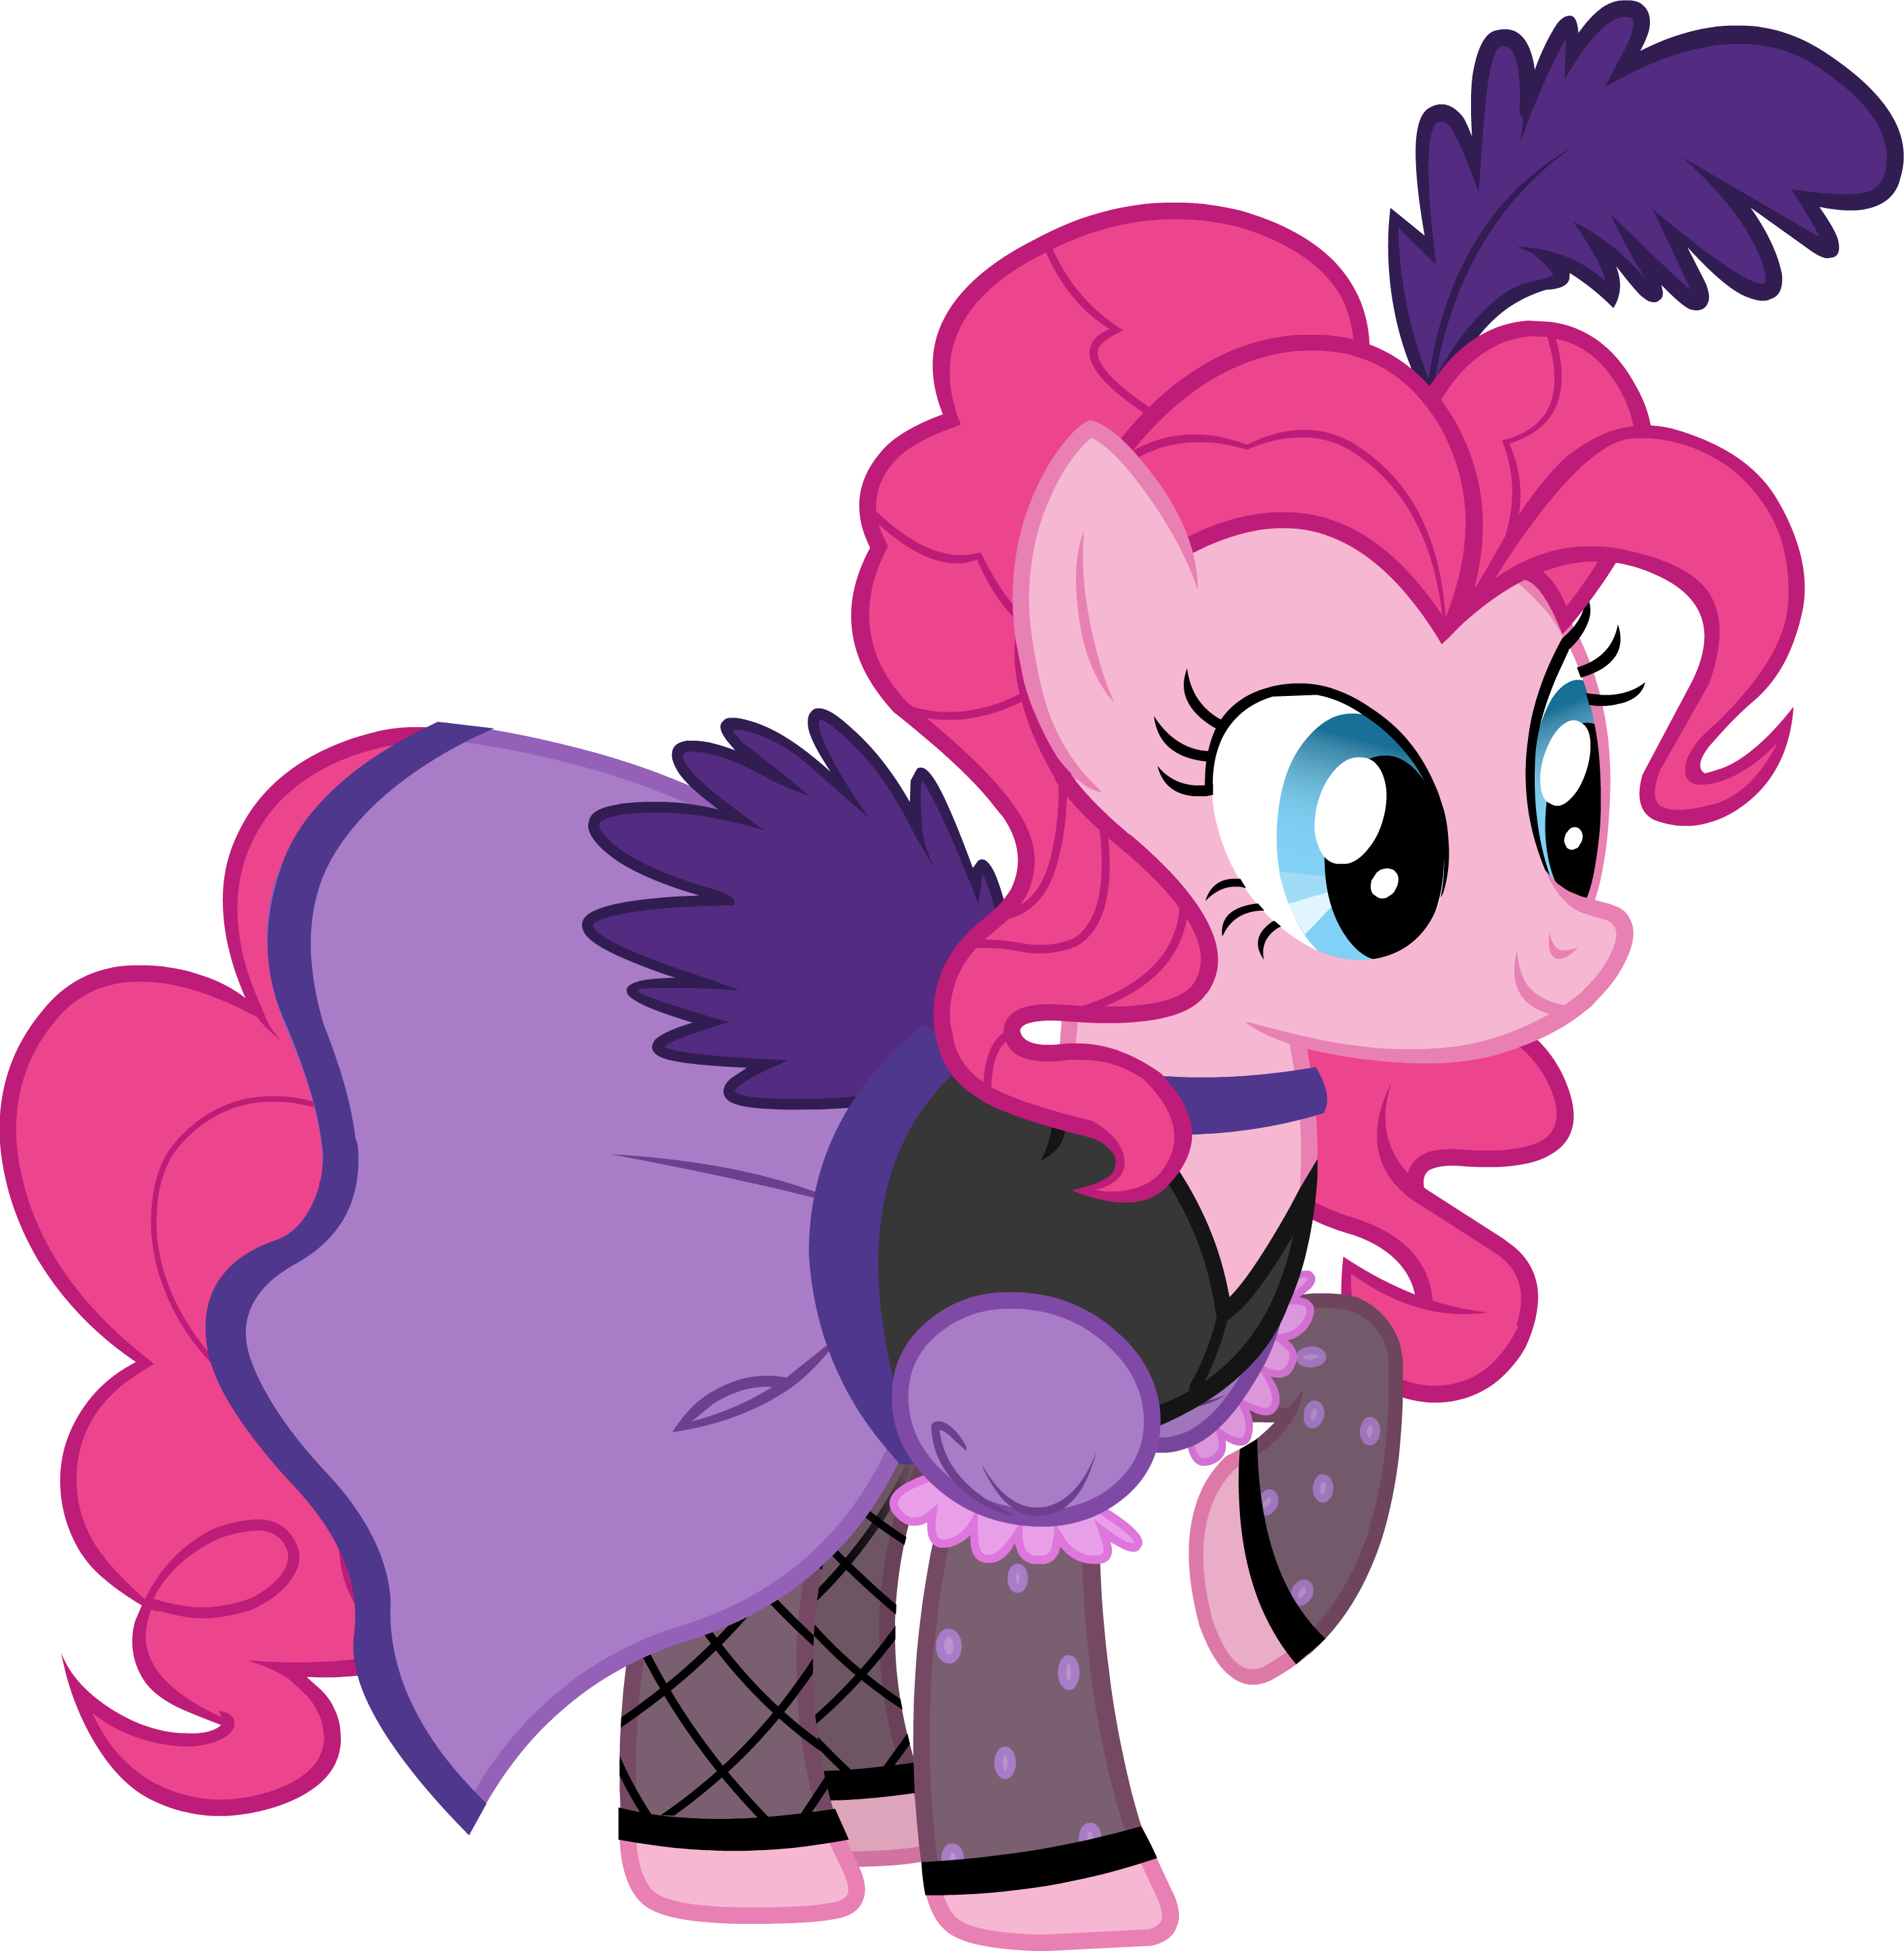 Pinkie Pie Eating A Cupcake Vector By Ponyengineer - My Little Pony Pinkie Pie Dress (2810x2879)